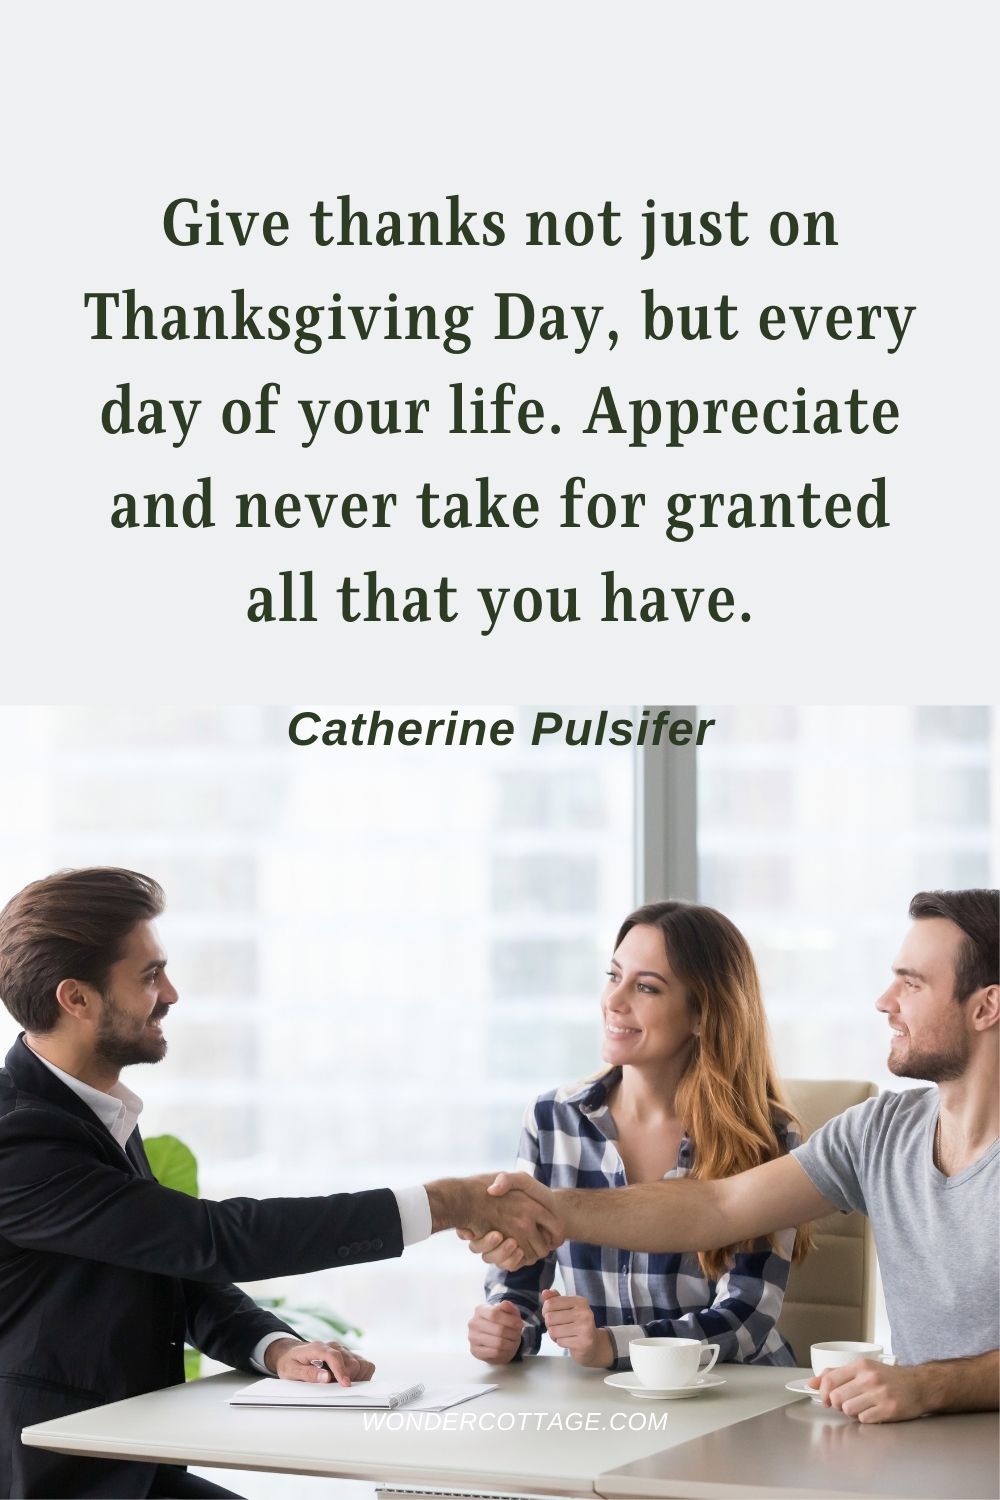 Give thanks not just on Thanksgiving Day, but every day of your life. Appreciate and never take for granted all that you have. Catherine Pulsifer